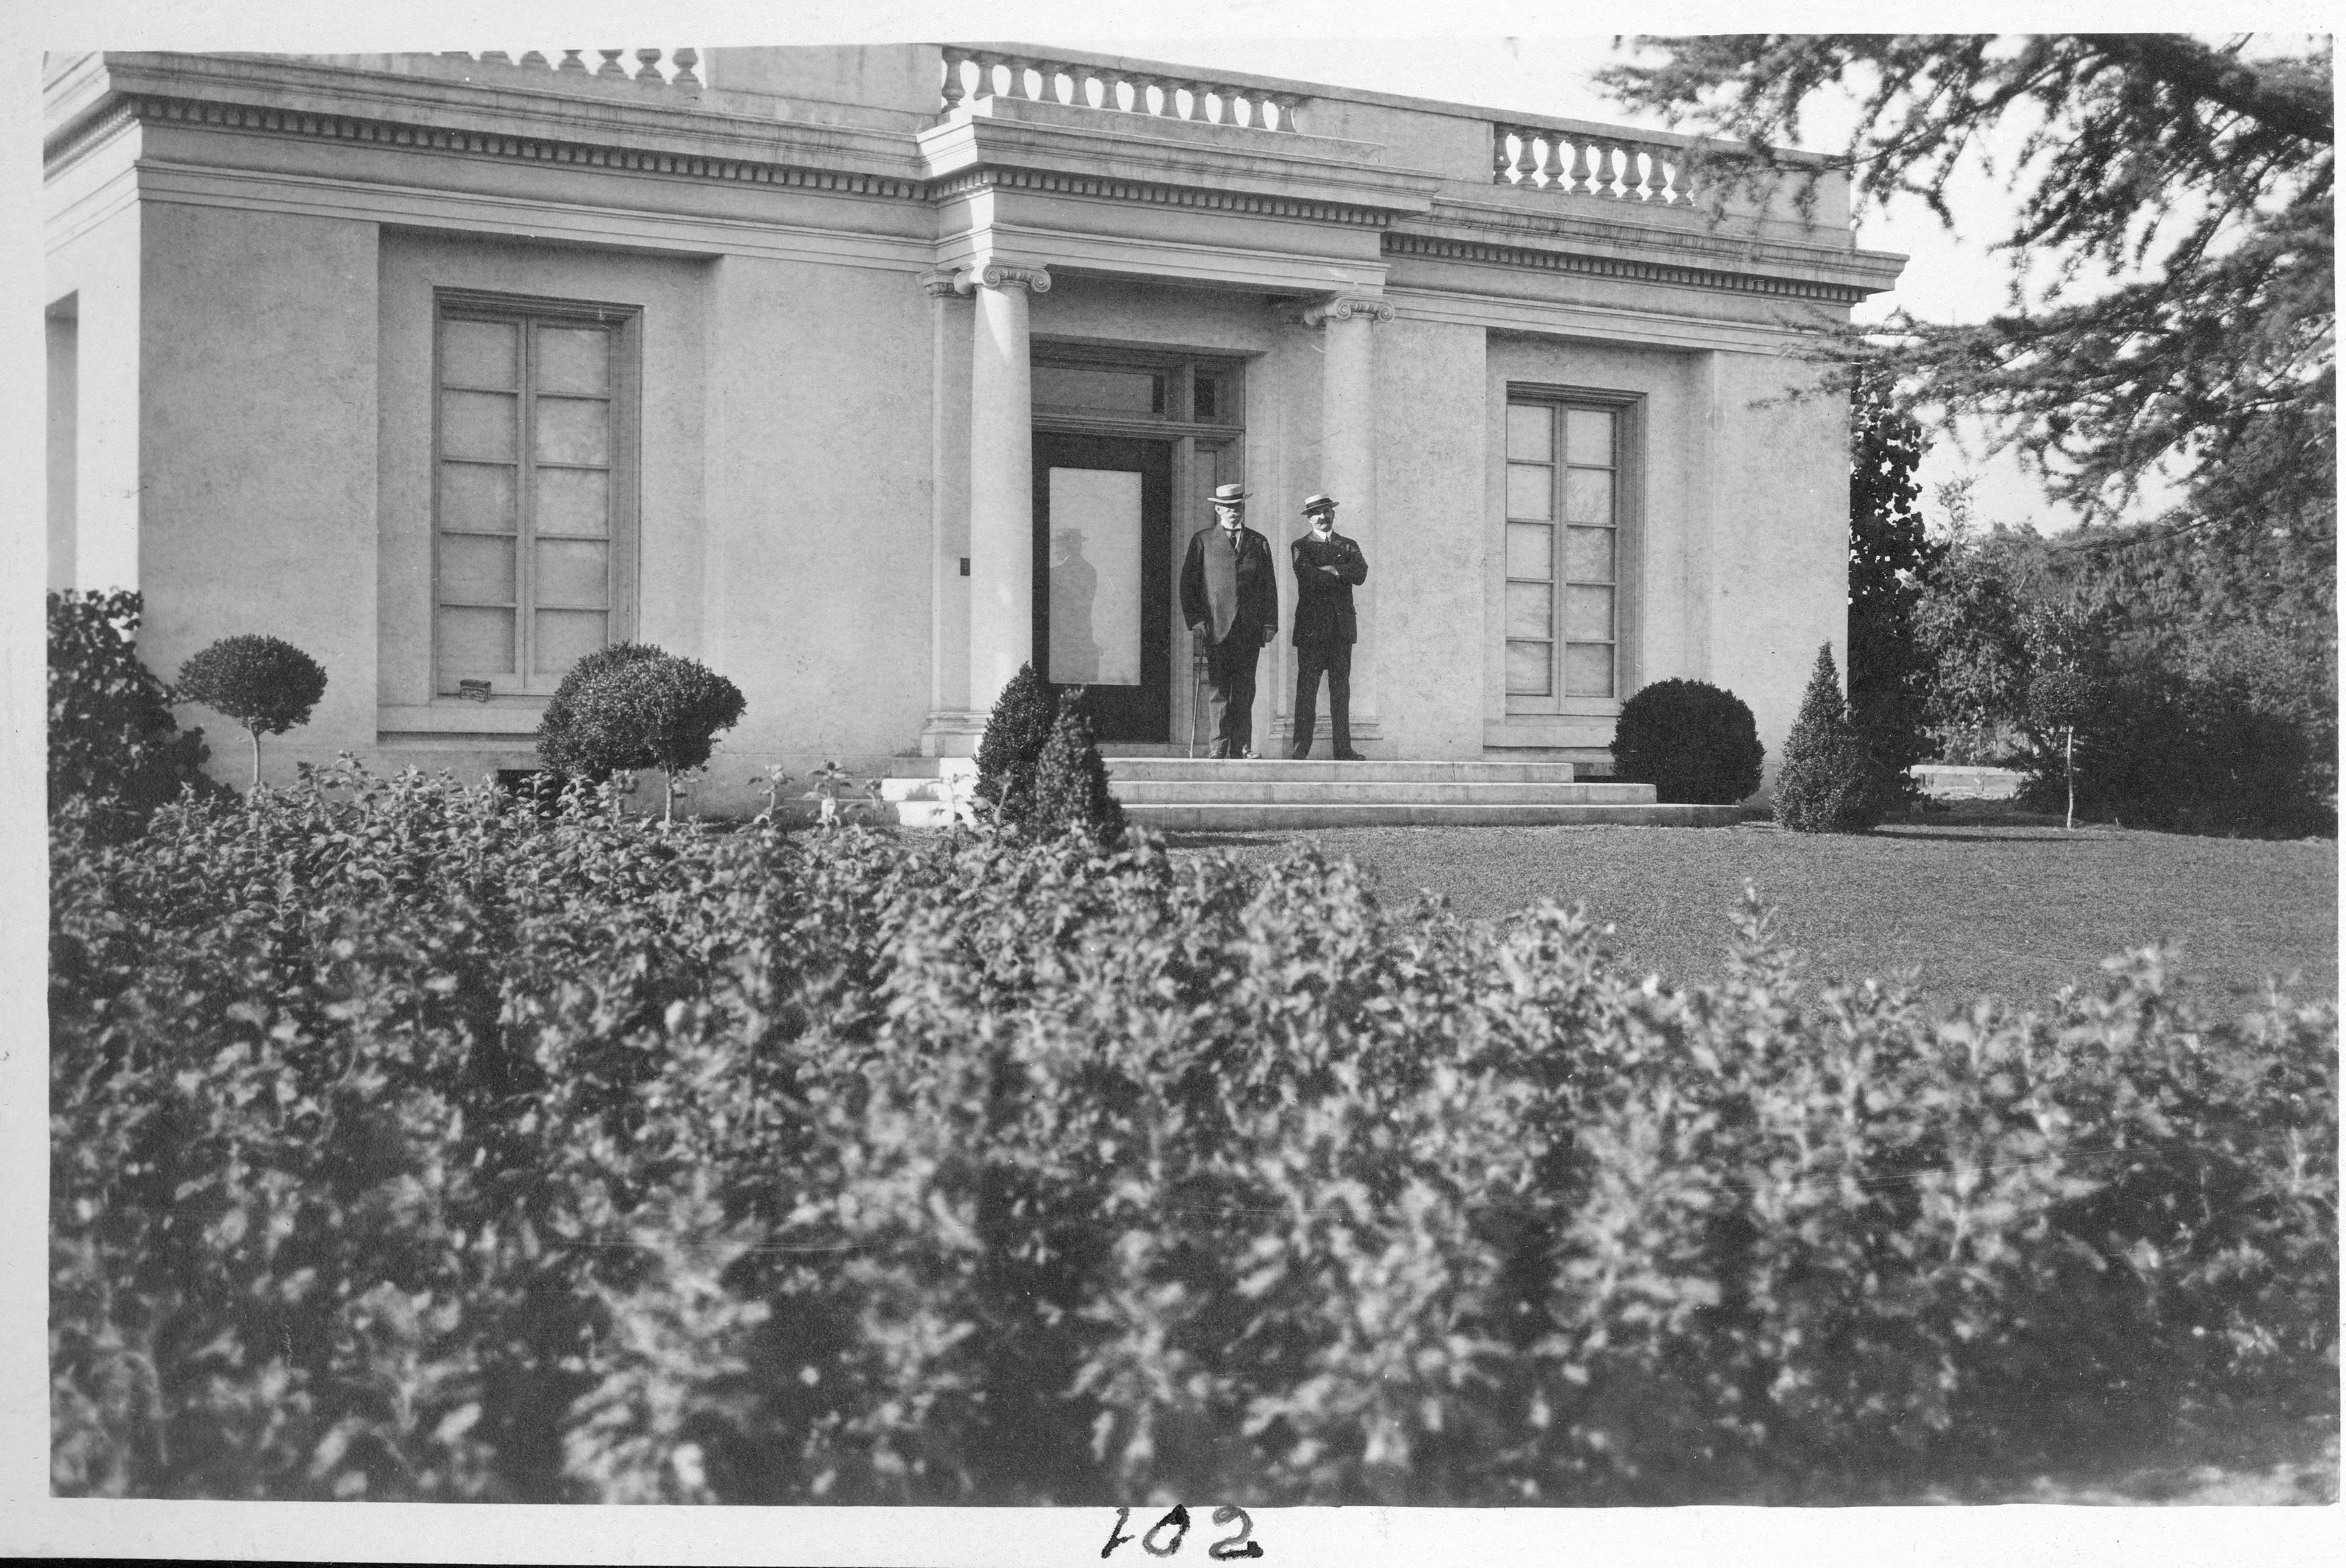 A black and white historic photograph showing two men standing in front of a white building.